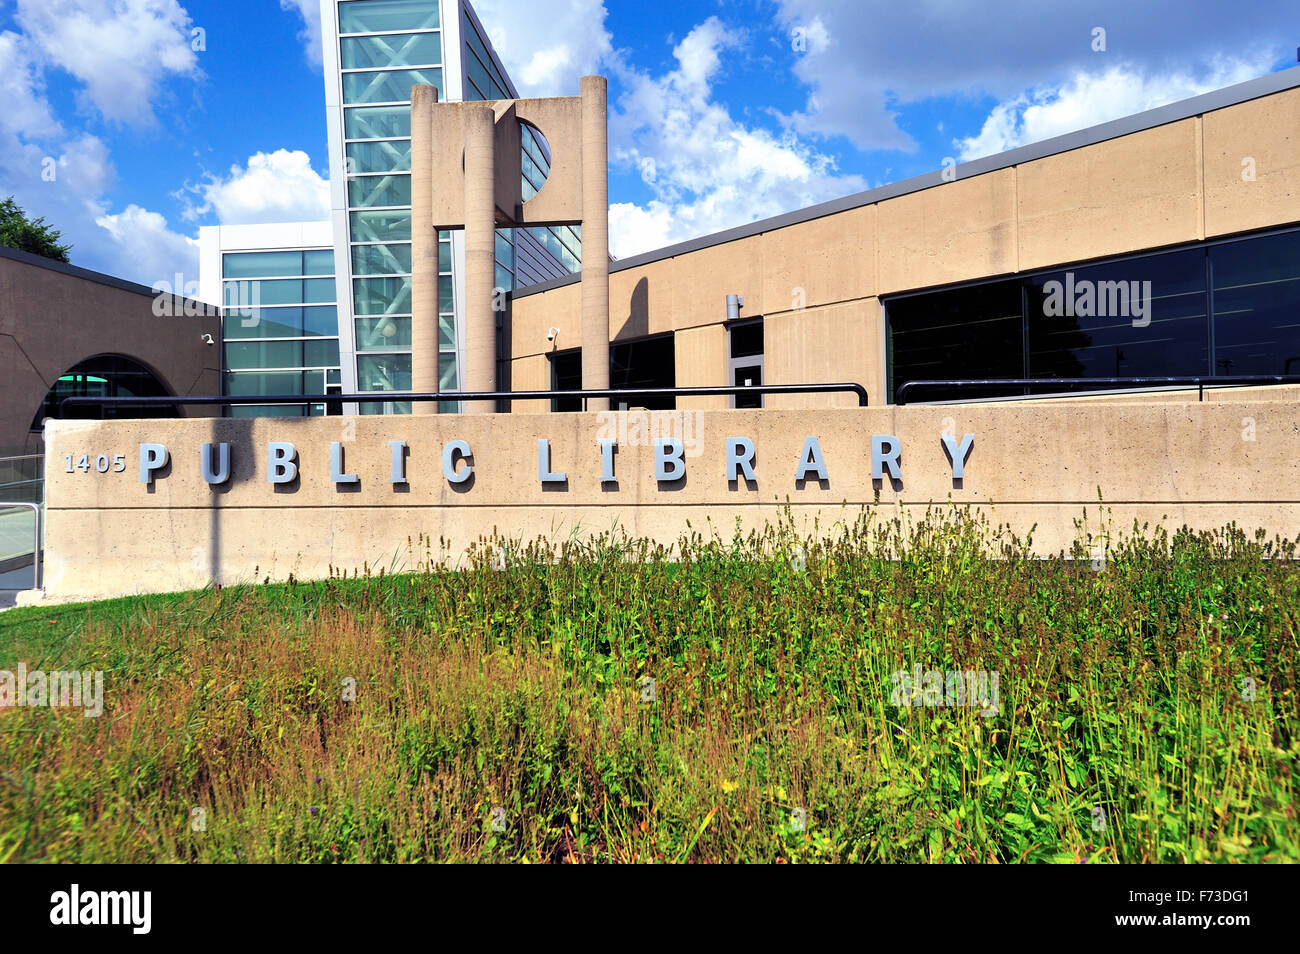 Public libraries a staple to most urban area communities. This modern version rests in the Chicago suburb of Streamwood, Illinois, USA. Stock Photo